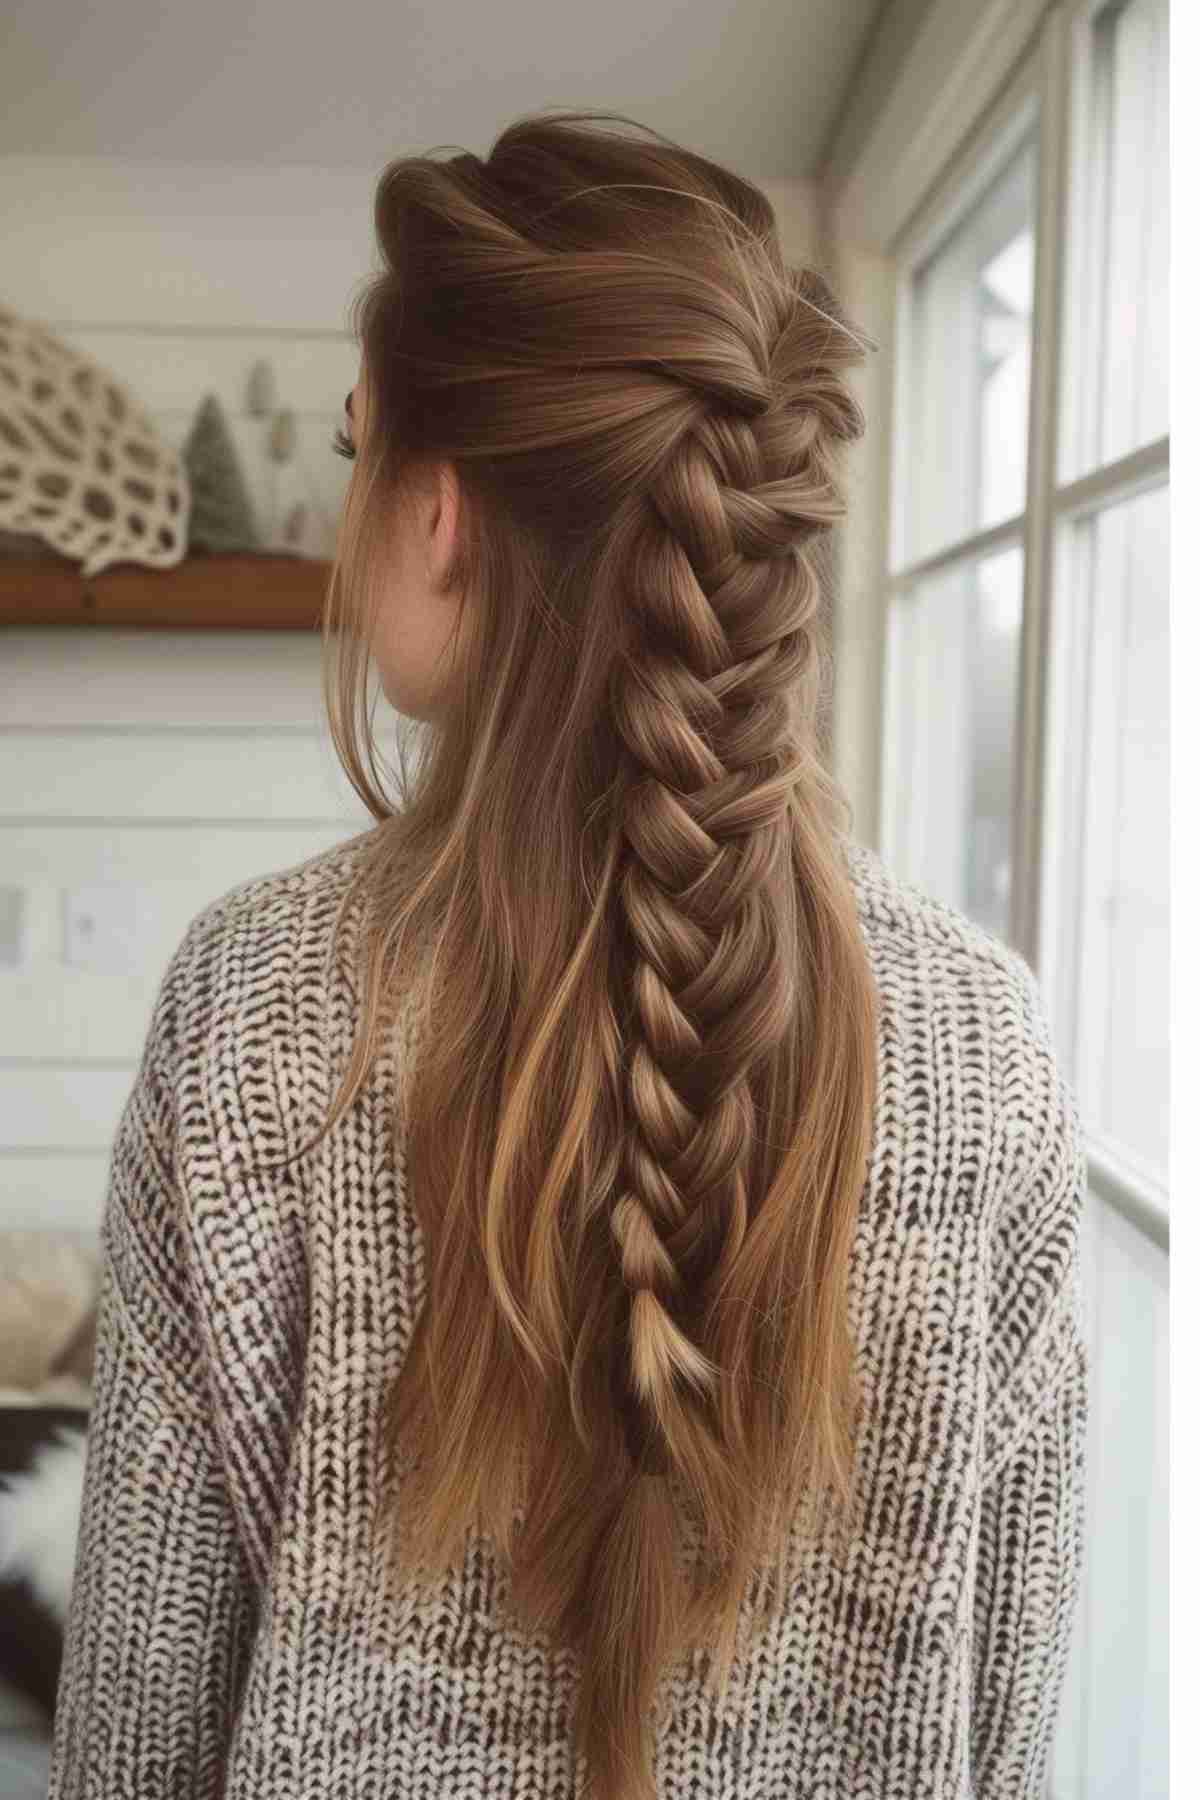 Top 10 Braided Hairstyles for Women Over 50 – dallas7